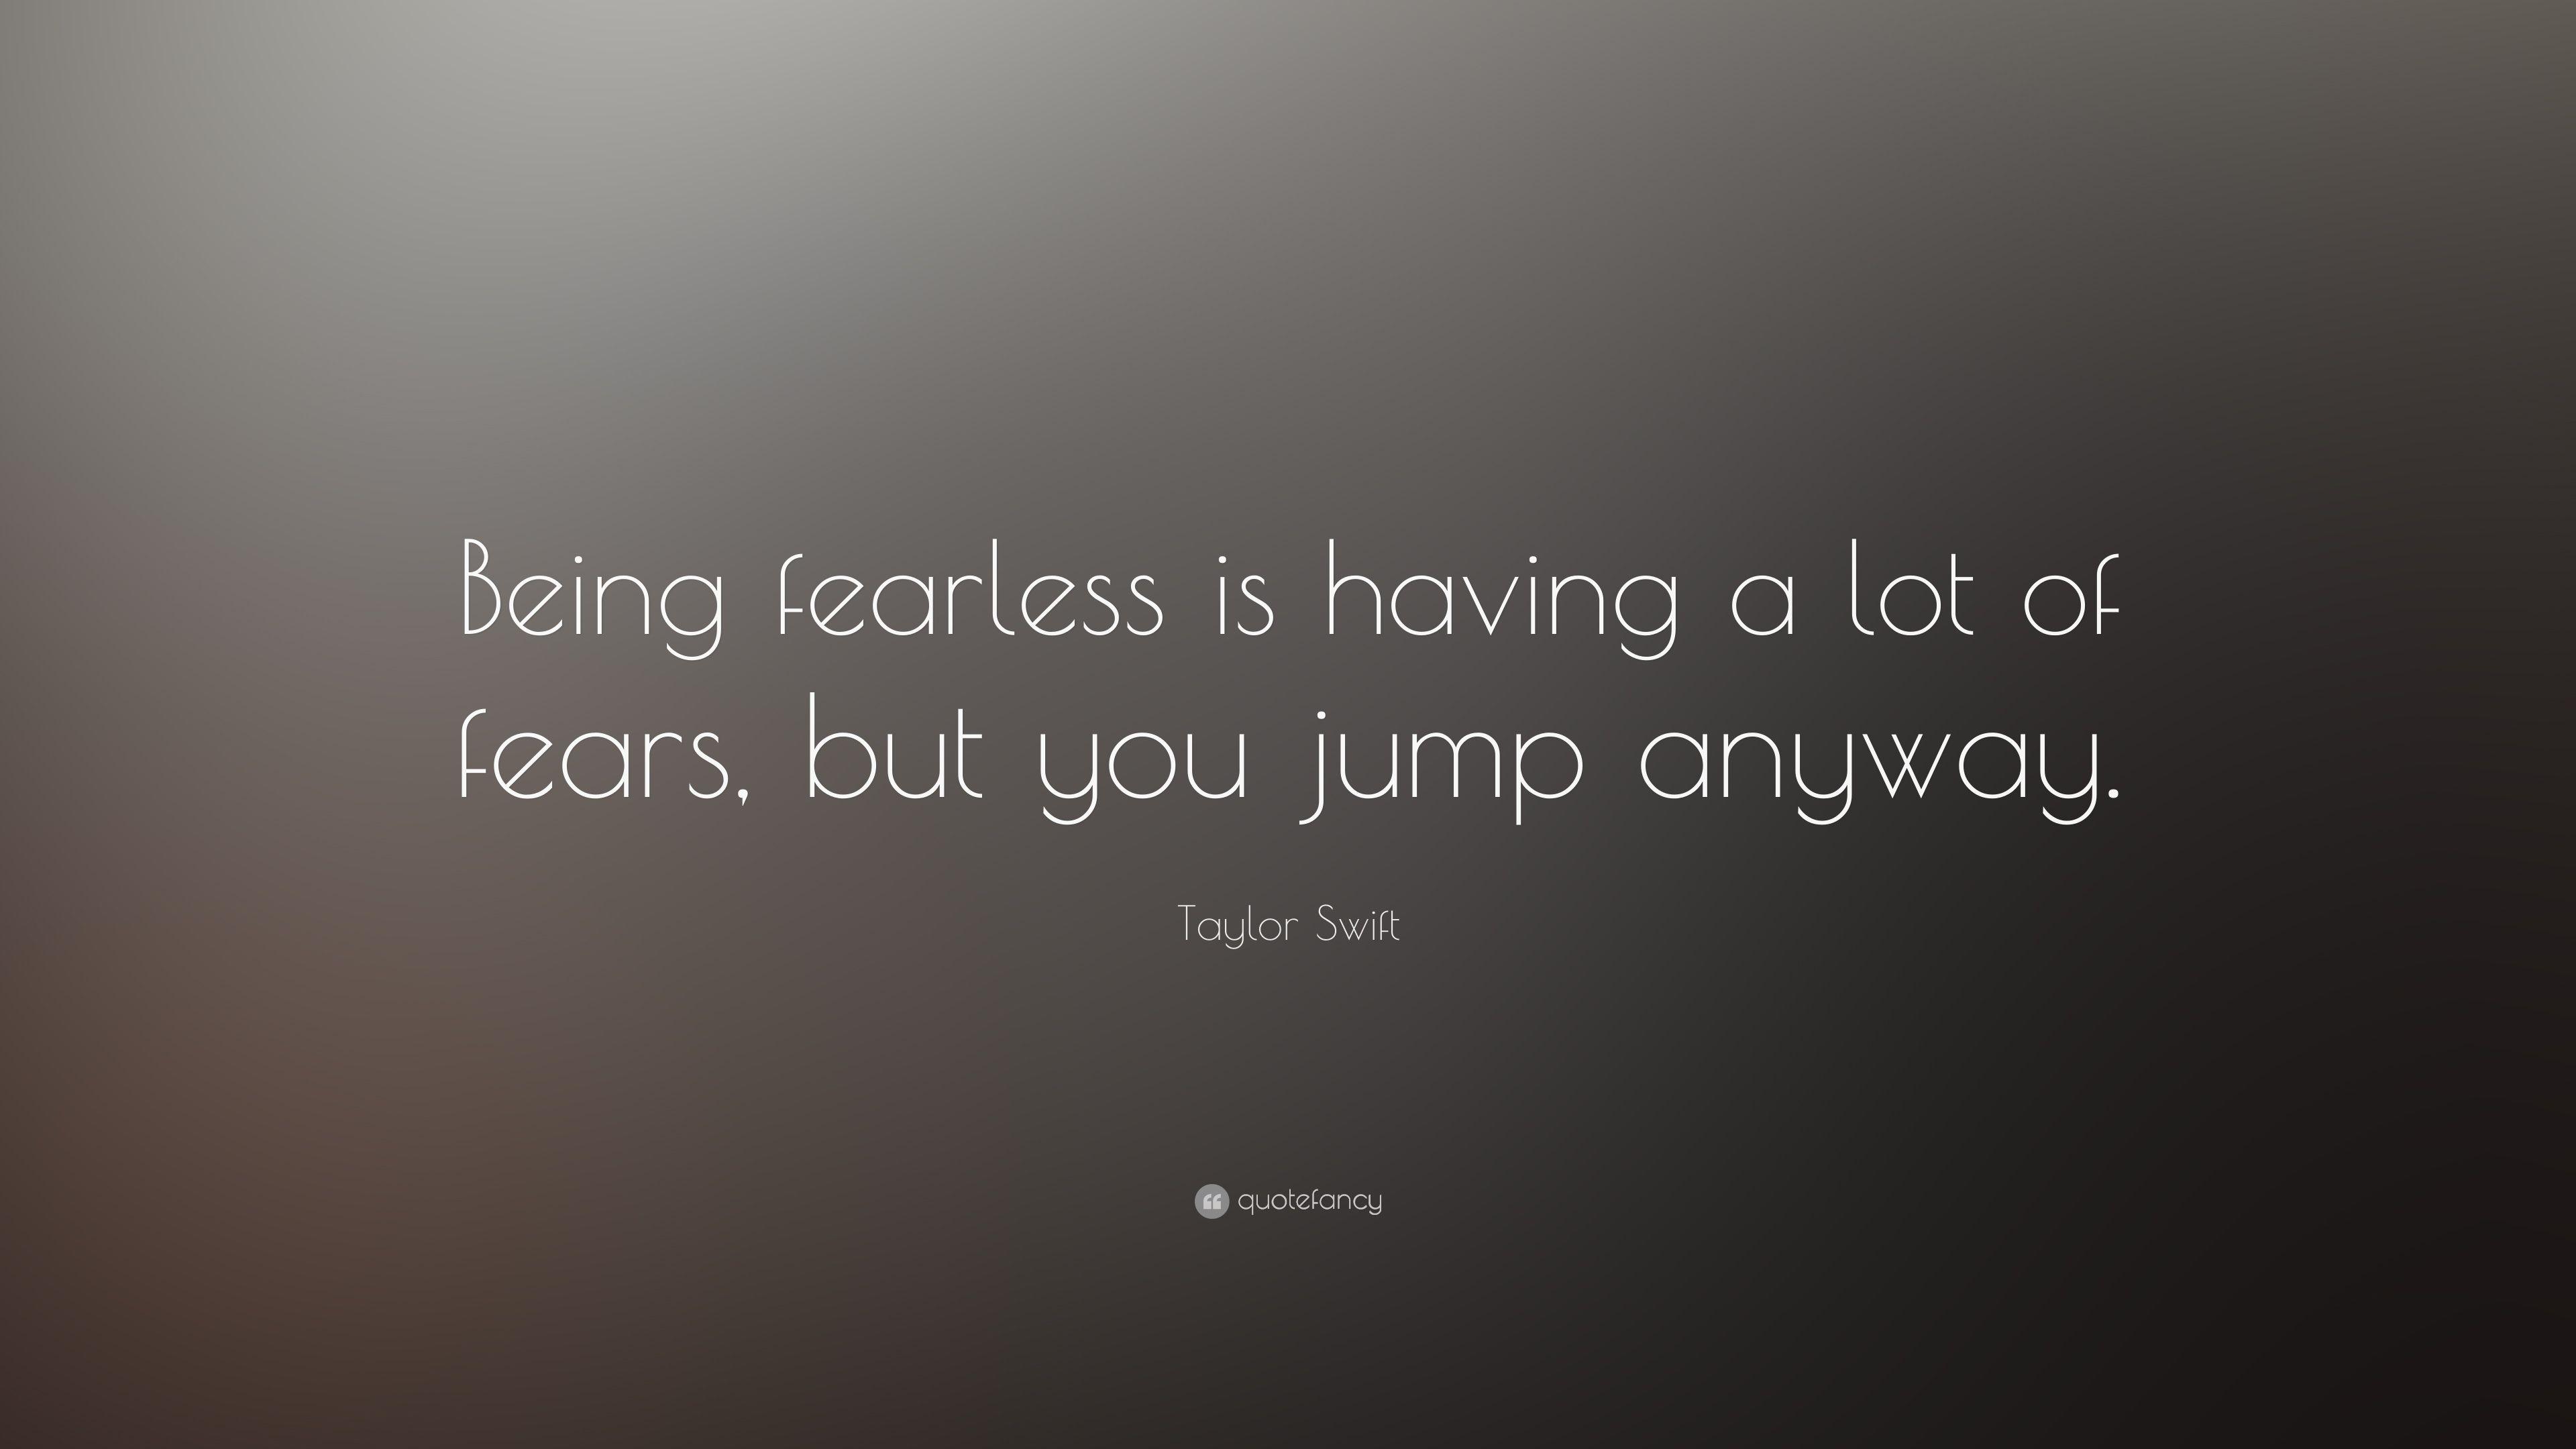 Taylor Swift Quote: “Being fearless is having a lot of fears, but